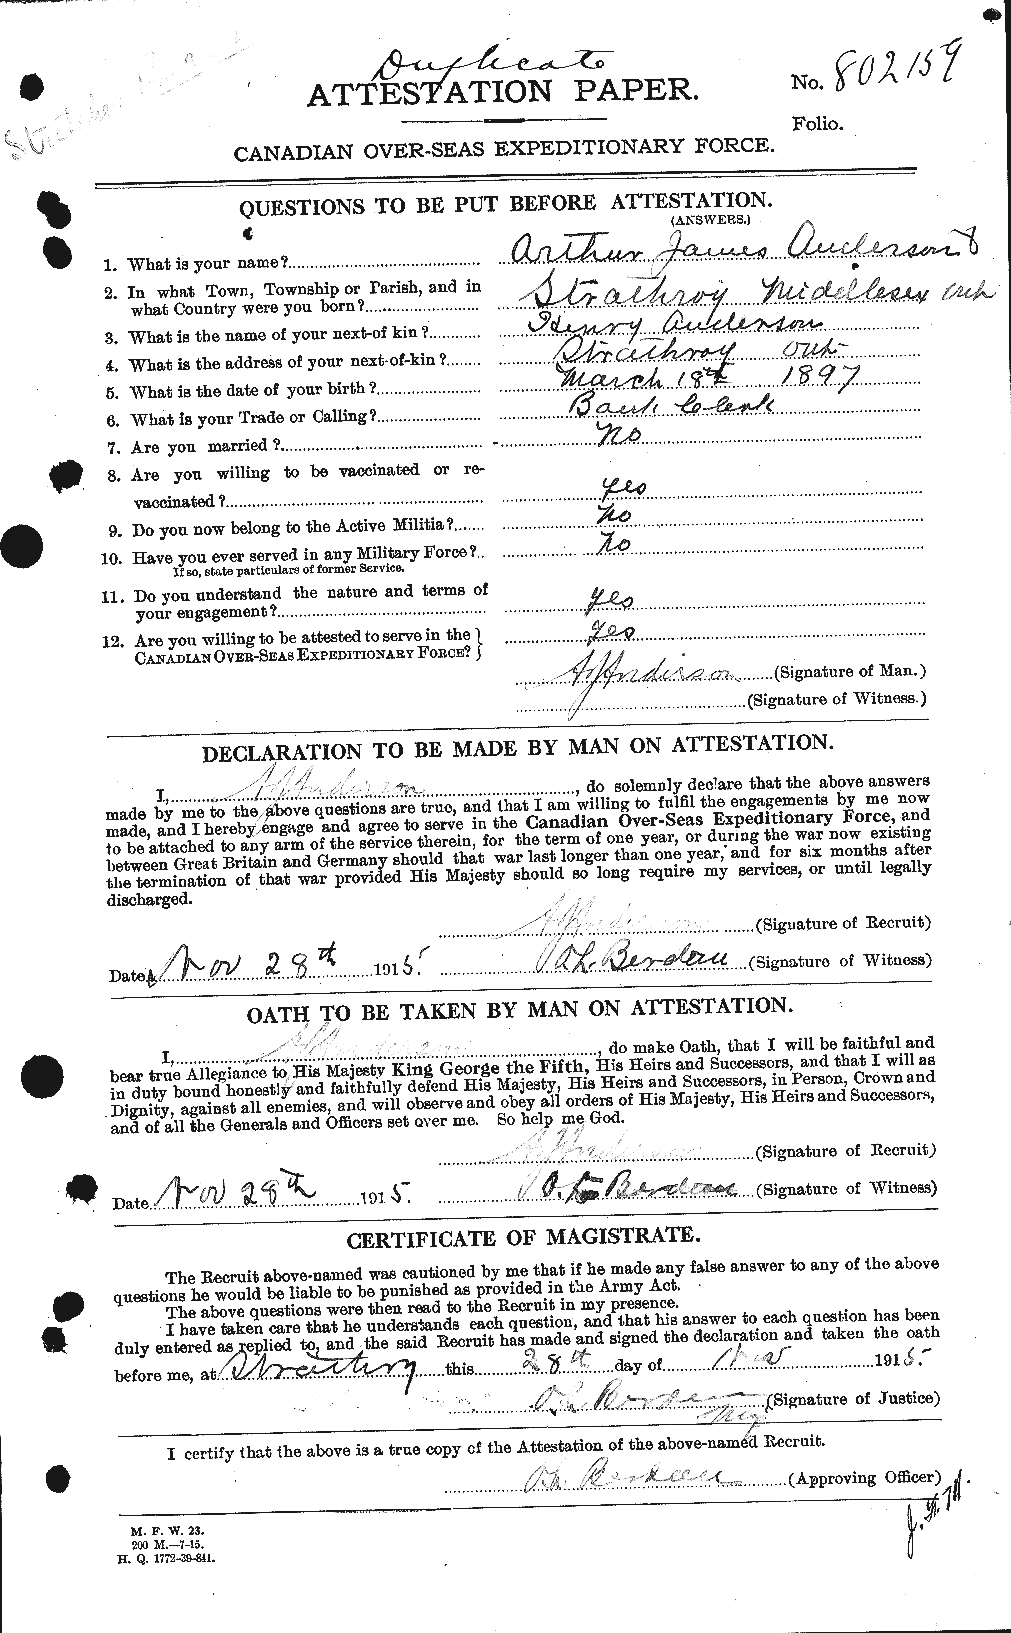 Personnel Records of the First World War - CEF 209354a